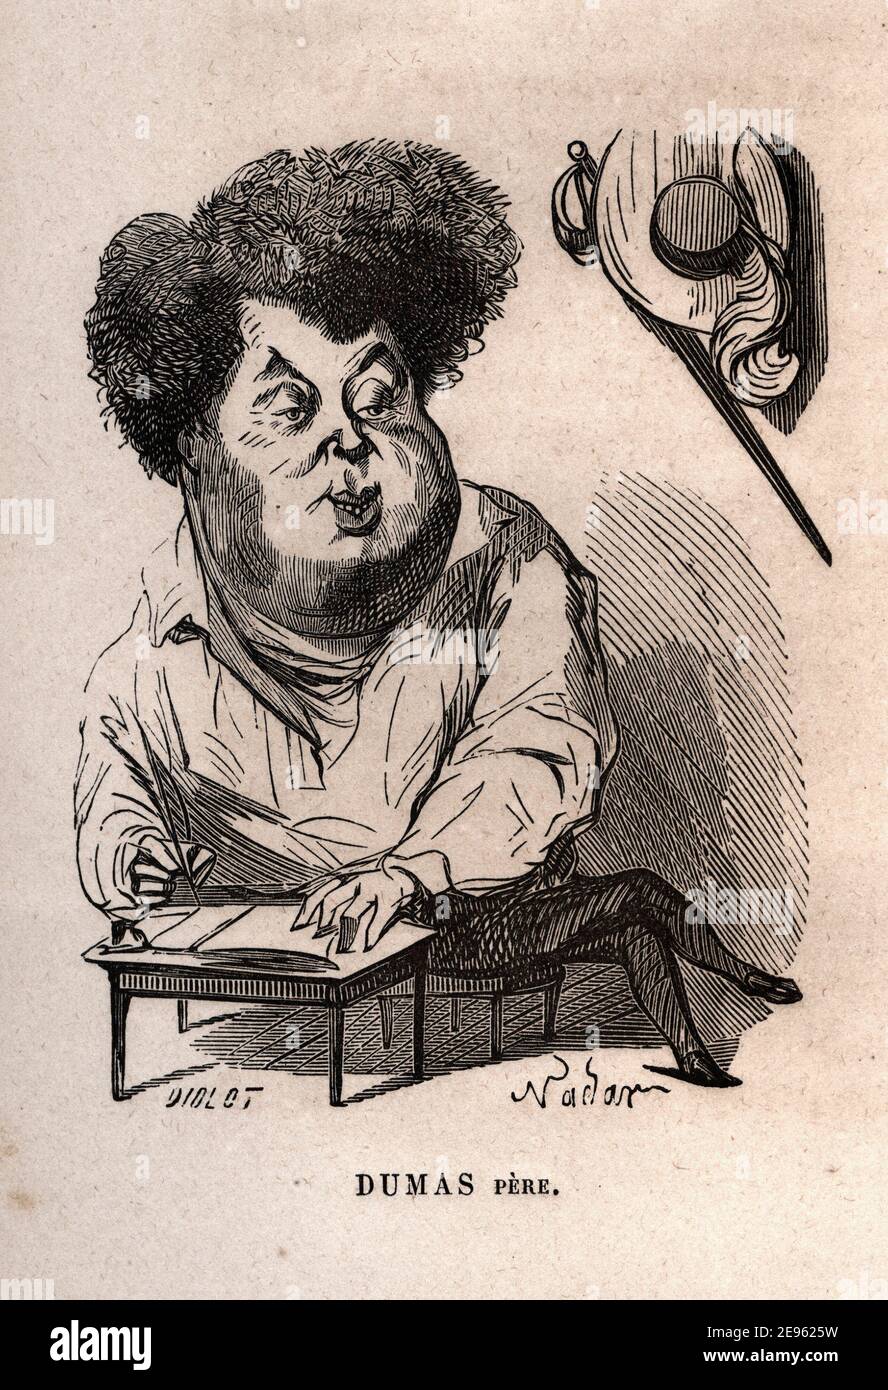 Caricature portrait of French writer Alexandre Dumas (pere) (1802 - 1870), 1858. Illustration by Nadar (1820 - 1910). Stock Photo